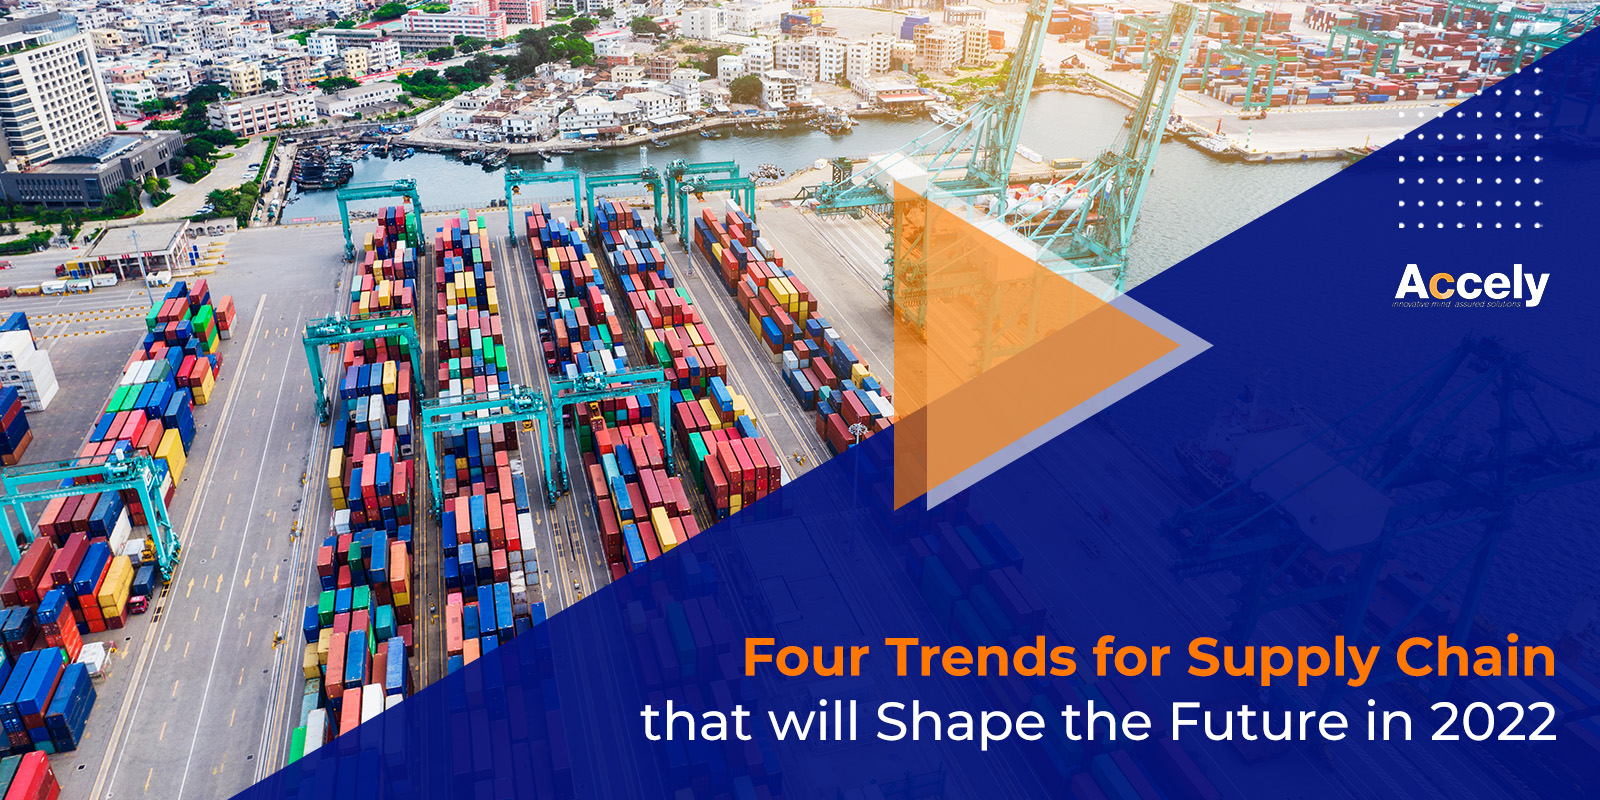 Four Trends for Supply Chain that will Shape the Future in 2022